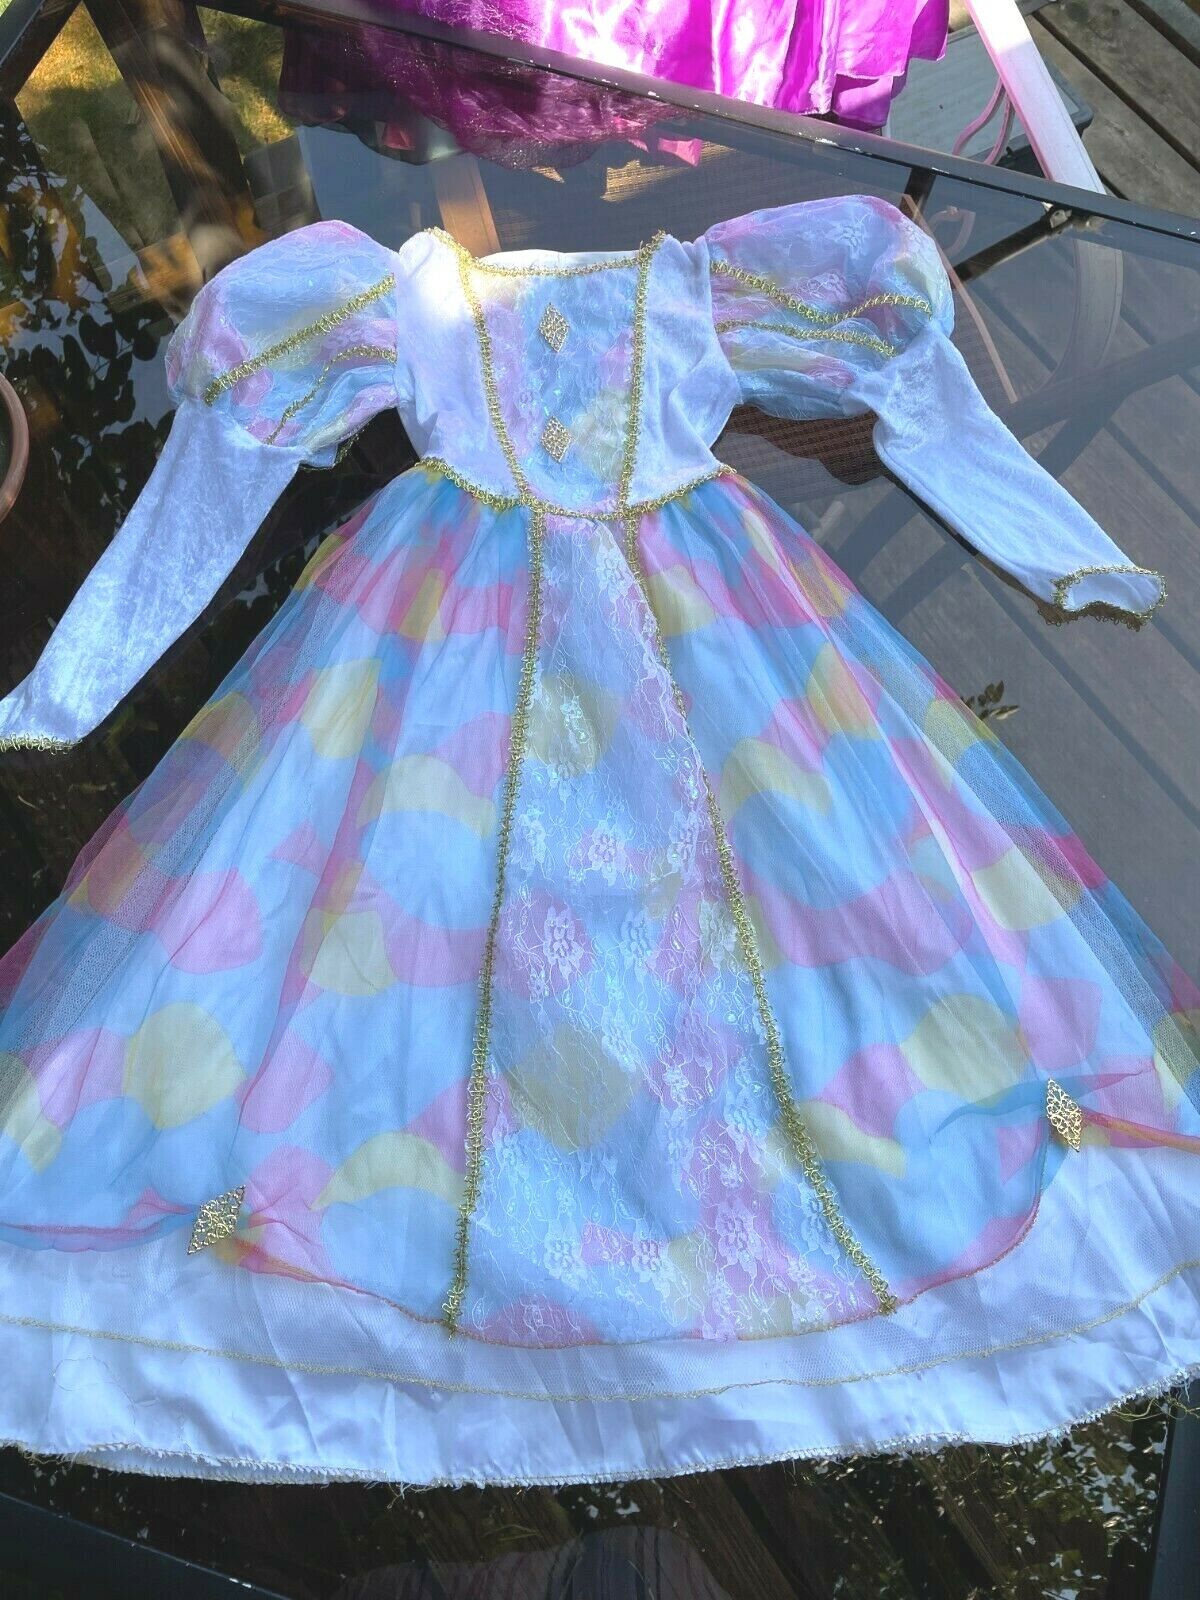 RAINBOW Safety and trust PRINCESS COSTUME Small Children's 4-6 New arrival